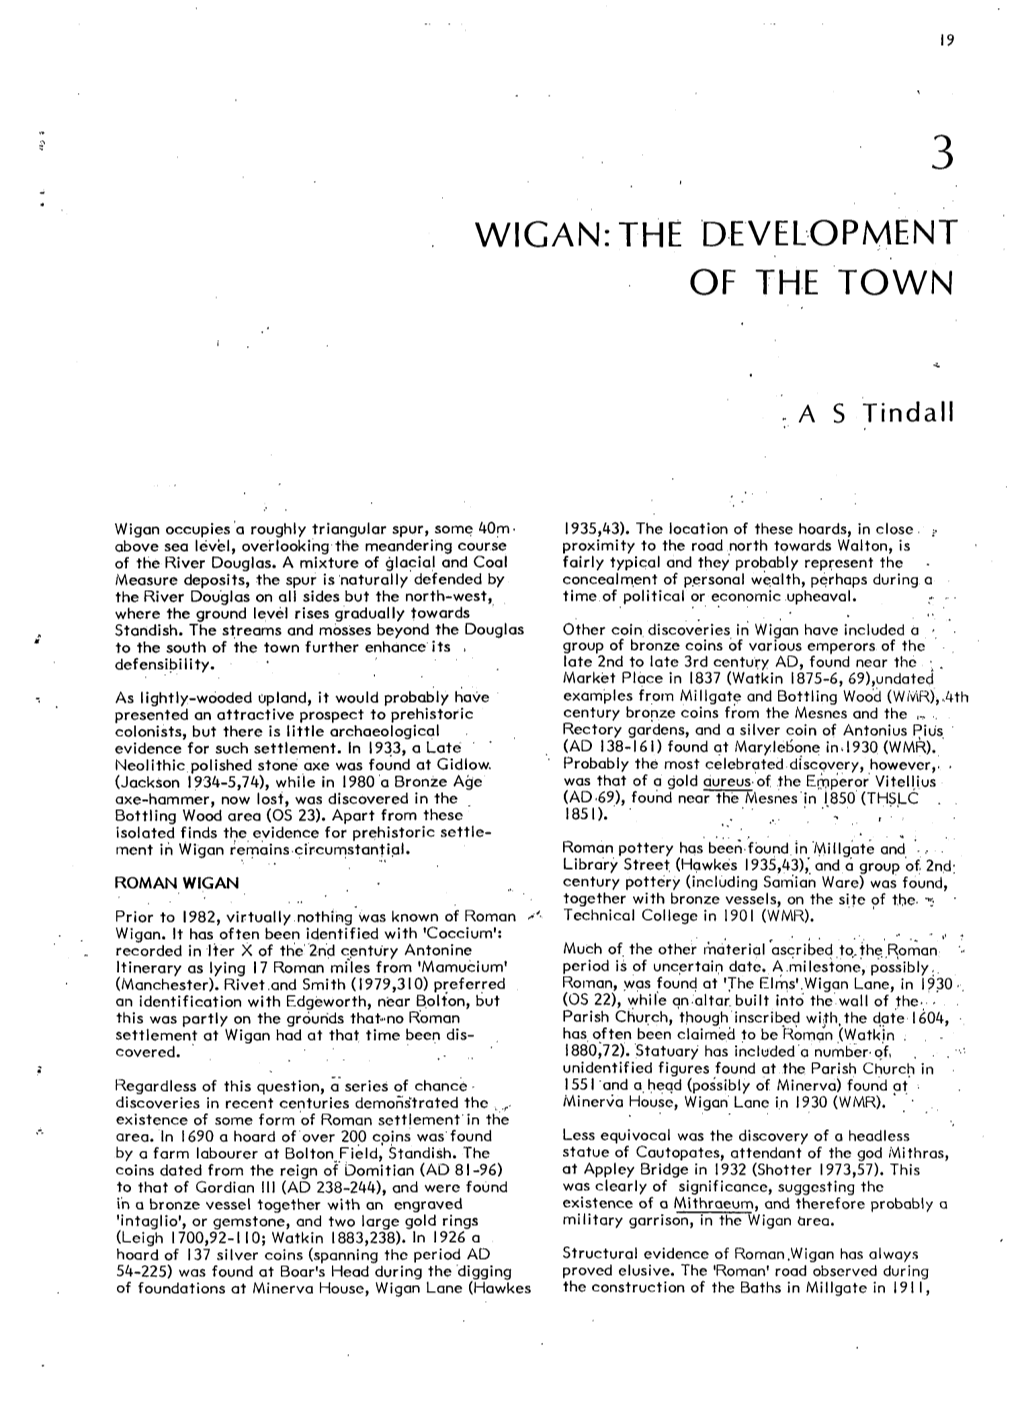 Wigan:The Development of the Town